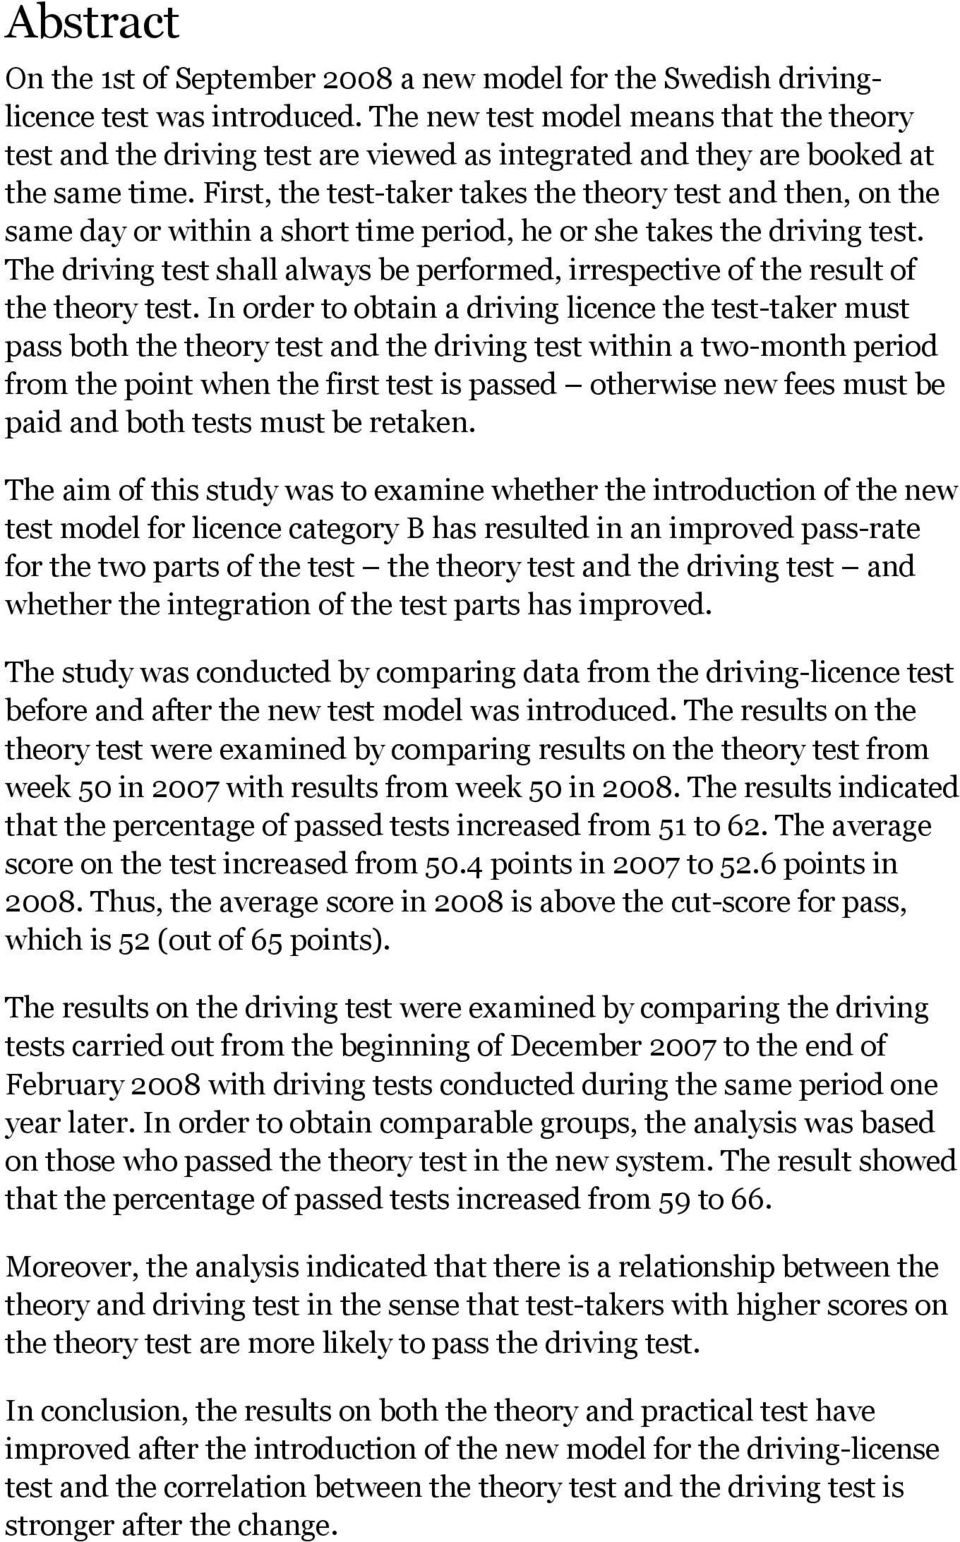 First, the test-taker takes the theory test and then, on the same day or within a short time period, he or she takes the driving test.